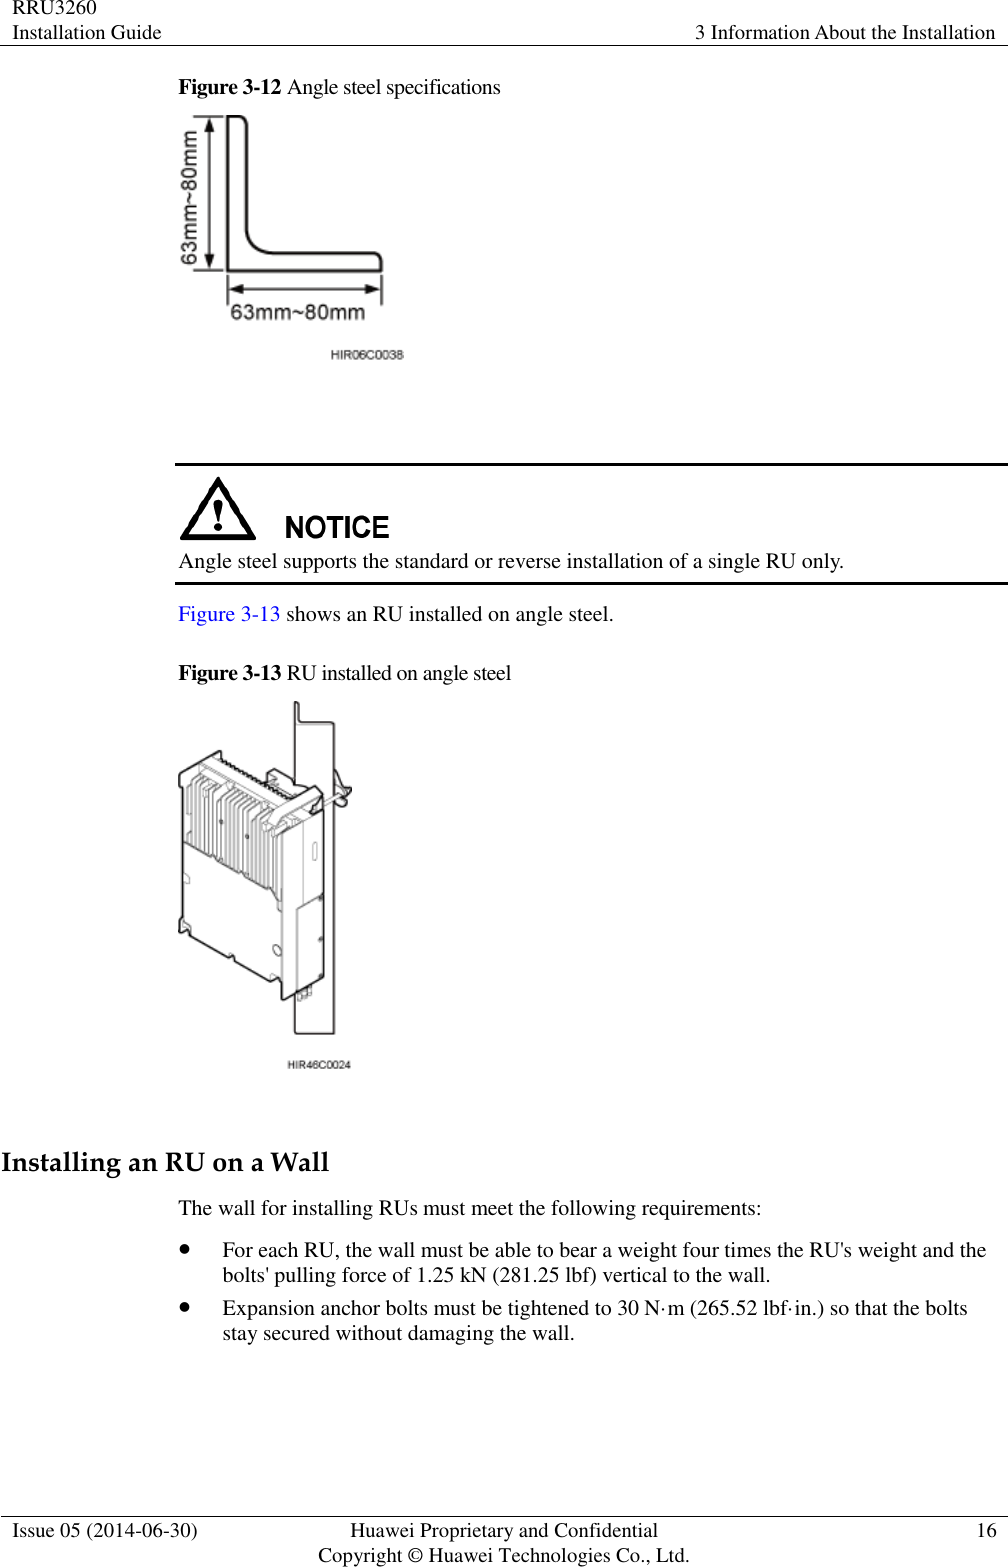 RRU3260 Installation Guide 3 Information About the Installation  Issue 05 (2014-06-30) Huawei Proprietary and Confidential                                     Copyright © Huawei Technologies Co., Ltd. 16  Figure 3-12 Angle steel specifications     Angle steel supports the standard or reverse installation of a single RU only. Figure 3-13 shows an RU installed on angle steel. Figure 3-13 RU installed on angle steel   Installing an RU on a Wall The wall for installing RUs must meet the following requirements:  For each RU, the wall must be able to bear a weight four times the RU&apos;s weight and the bolts&apos; pulling force of 1.25 kN (281.25 lbf) vertical to the wall.  Expansion anchor bolts must be tightened to 30 N·m (265.52 lbf·in.) so that the bolts stay secured without damaging the wall.  